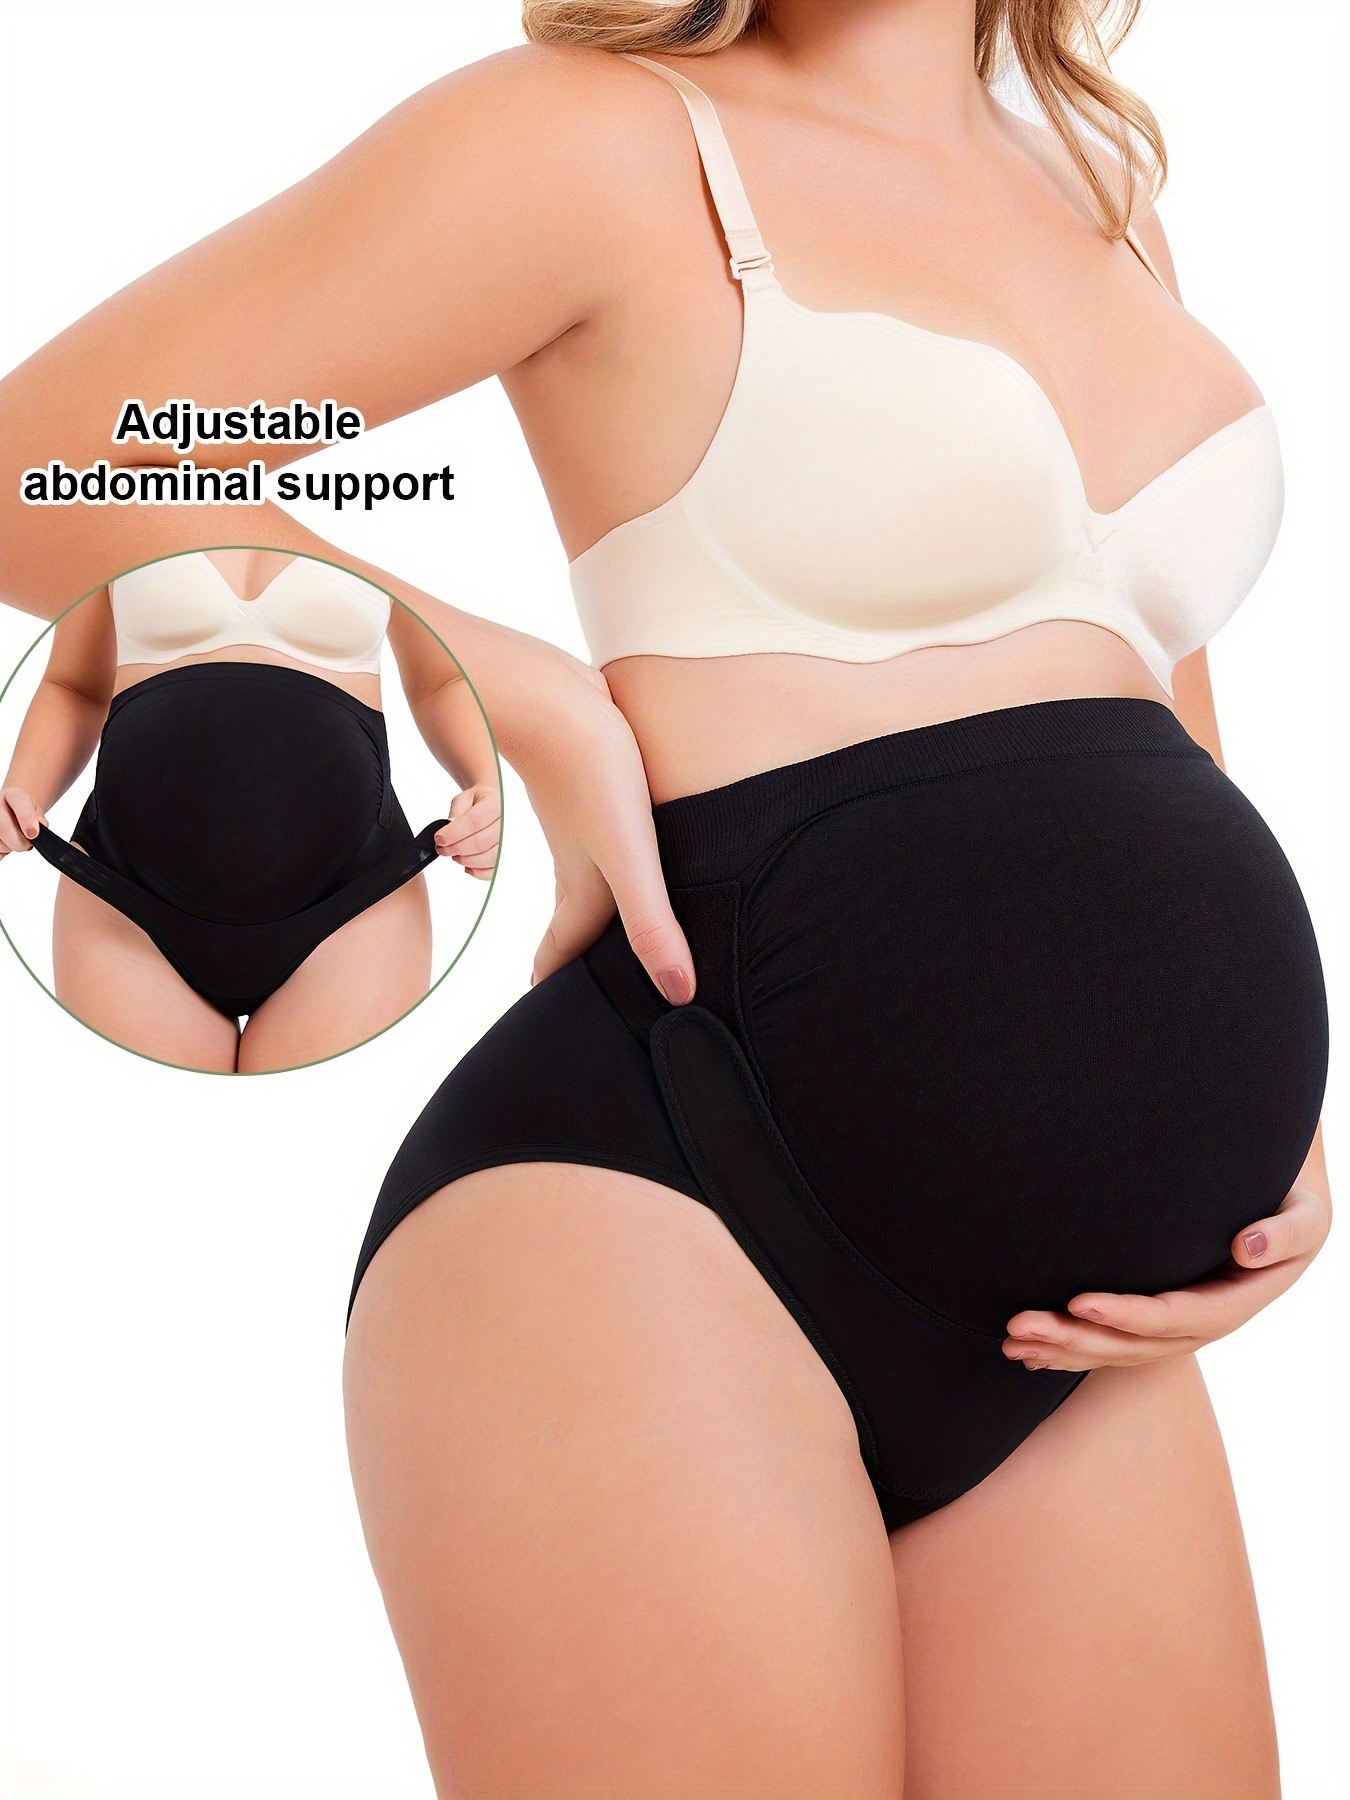 Women's Maternity Solid Boxer Briefs Medium Stretchy Comfy Belly Support  Underwear, Pregnant Women's Clothing